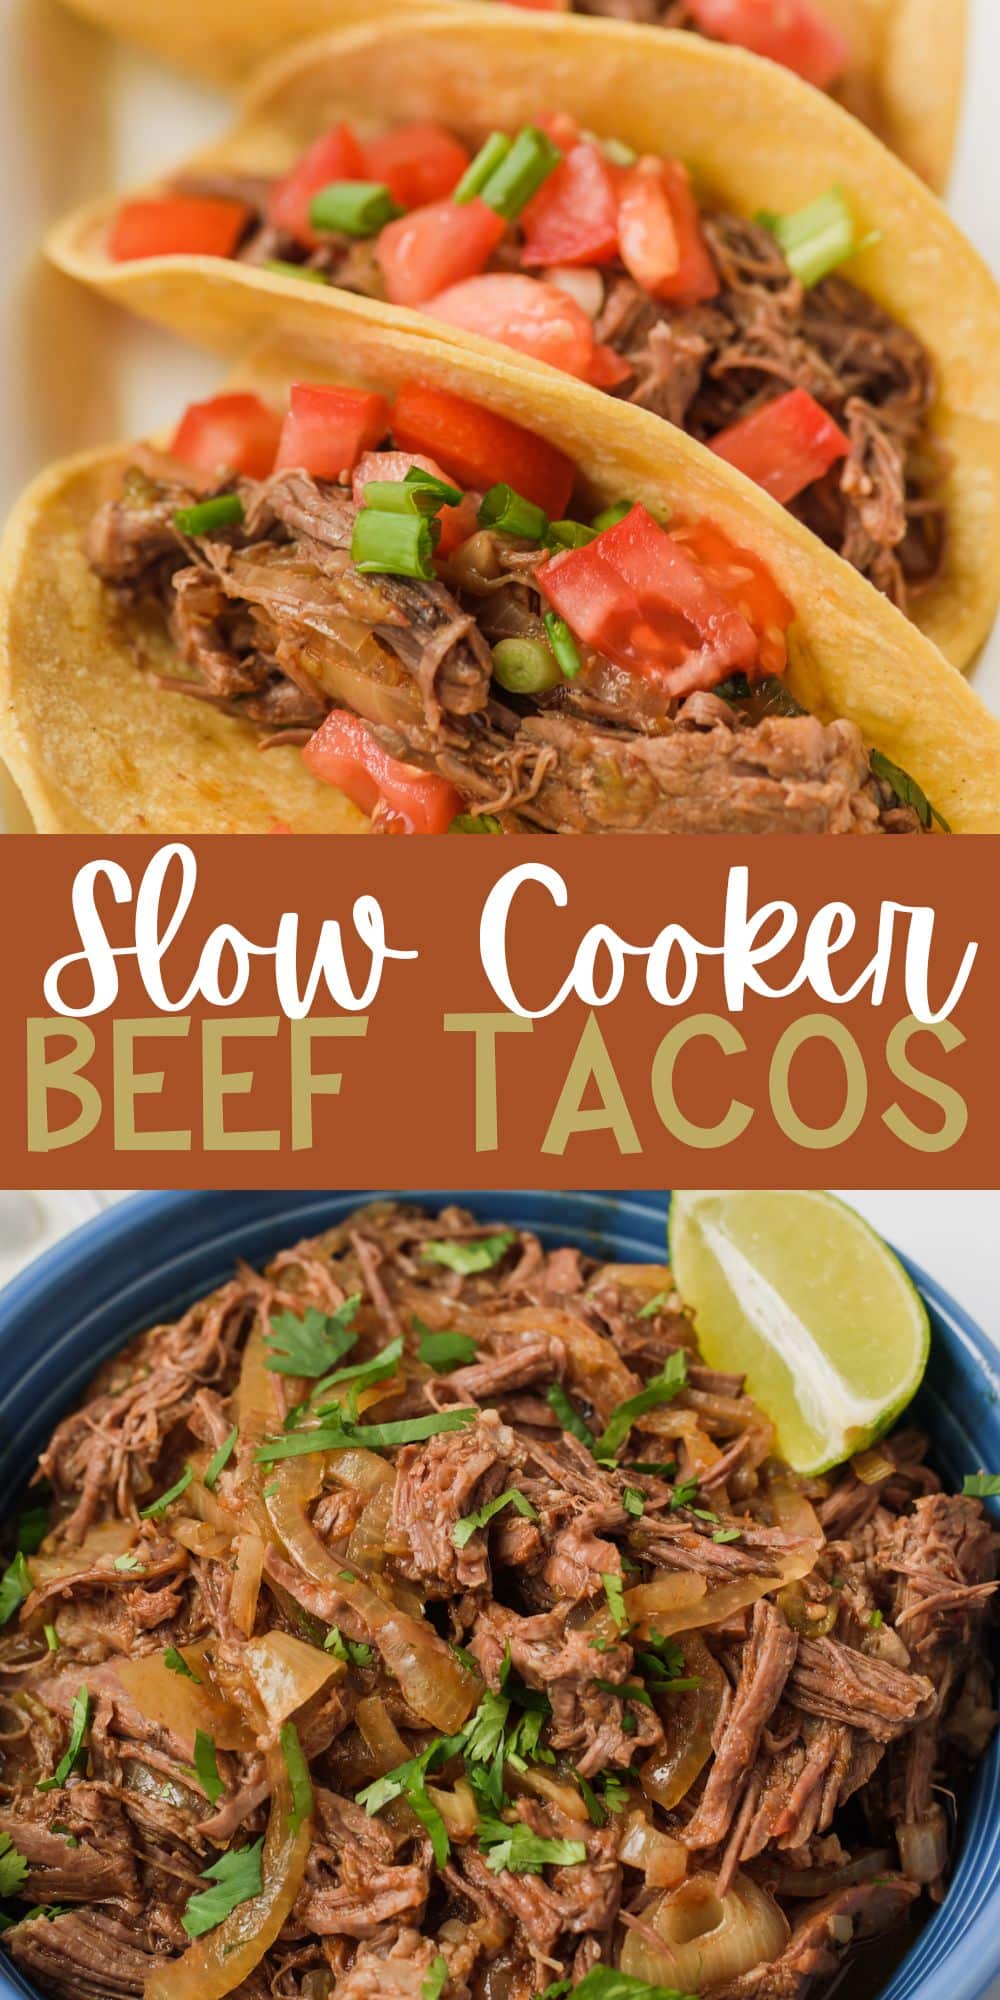 two photos of shredded beef in a tacos mixed with tomatoes and with words on the image.